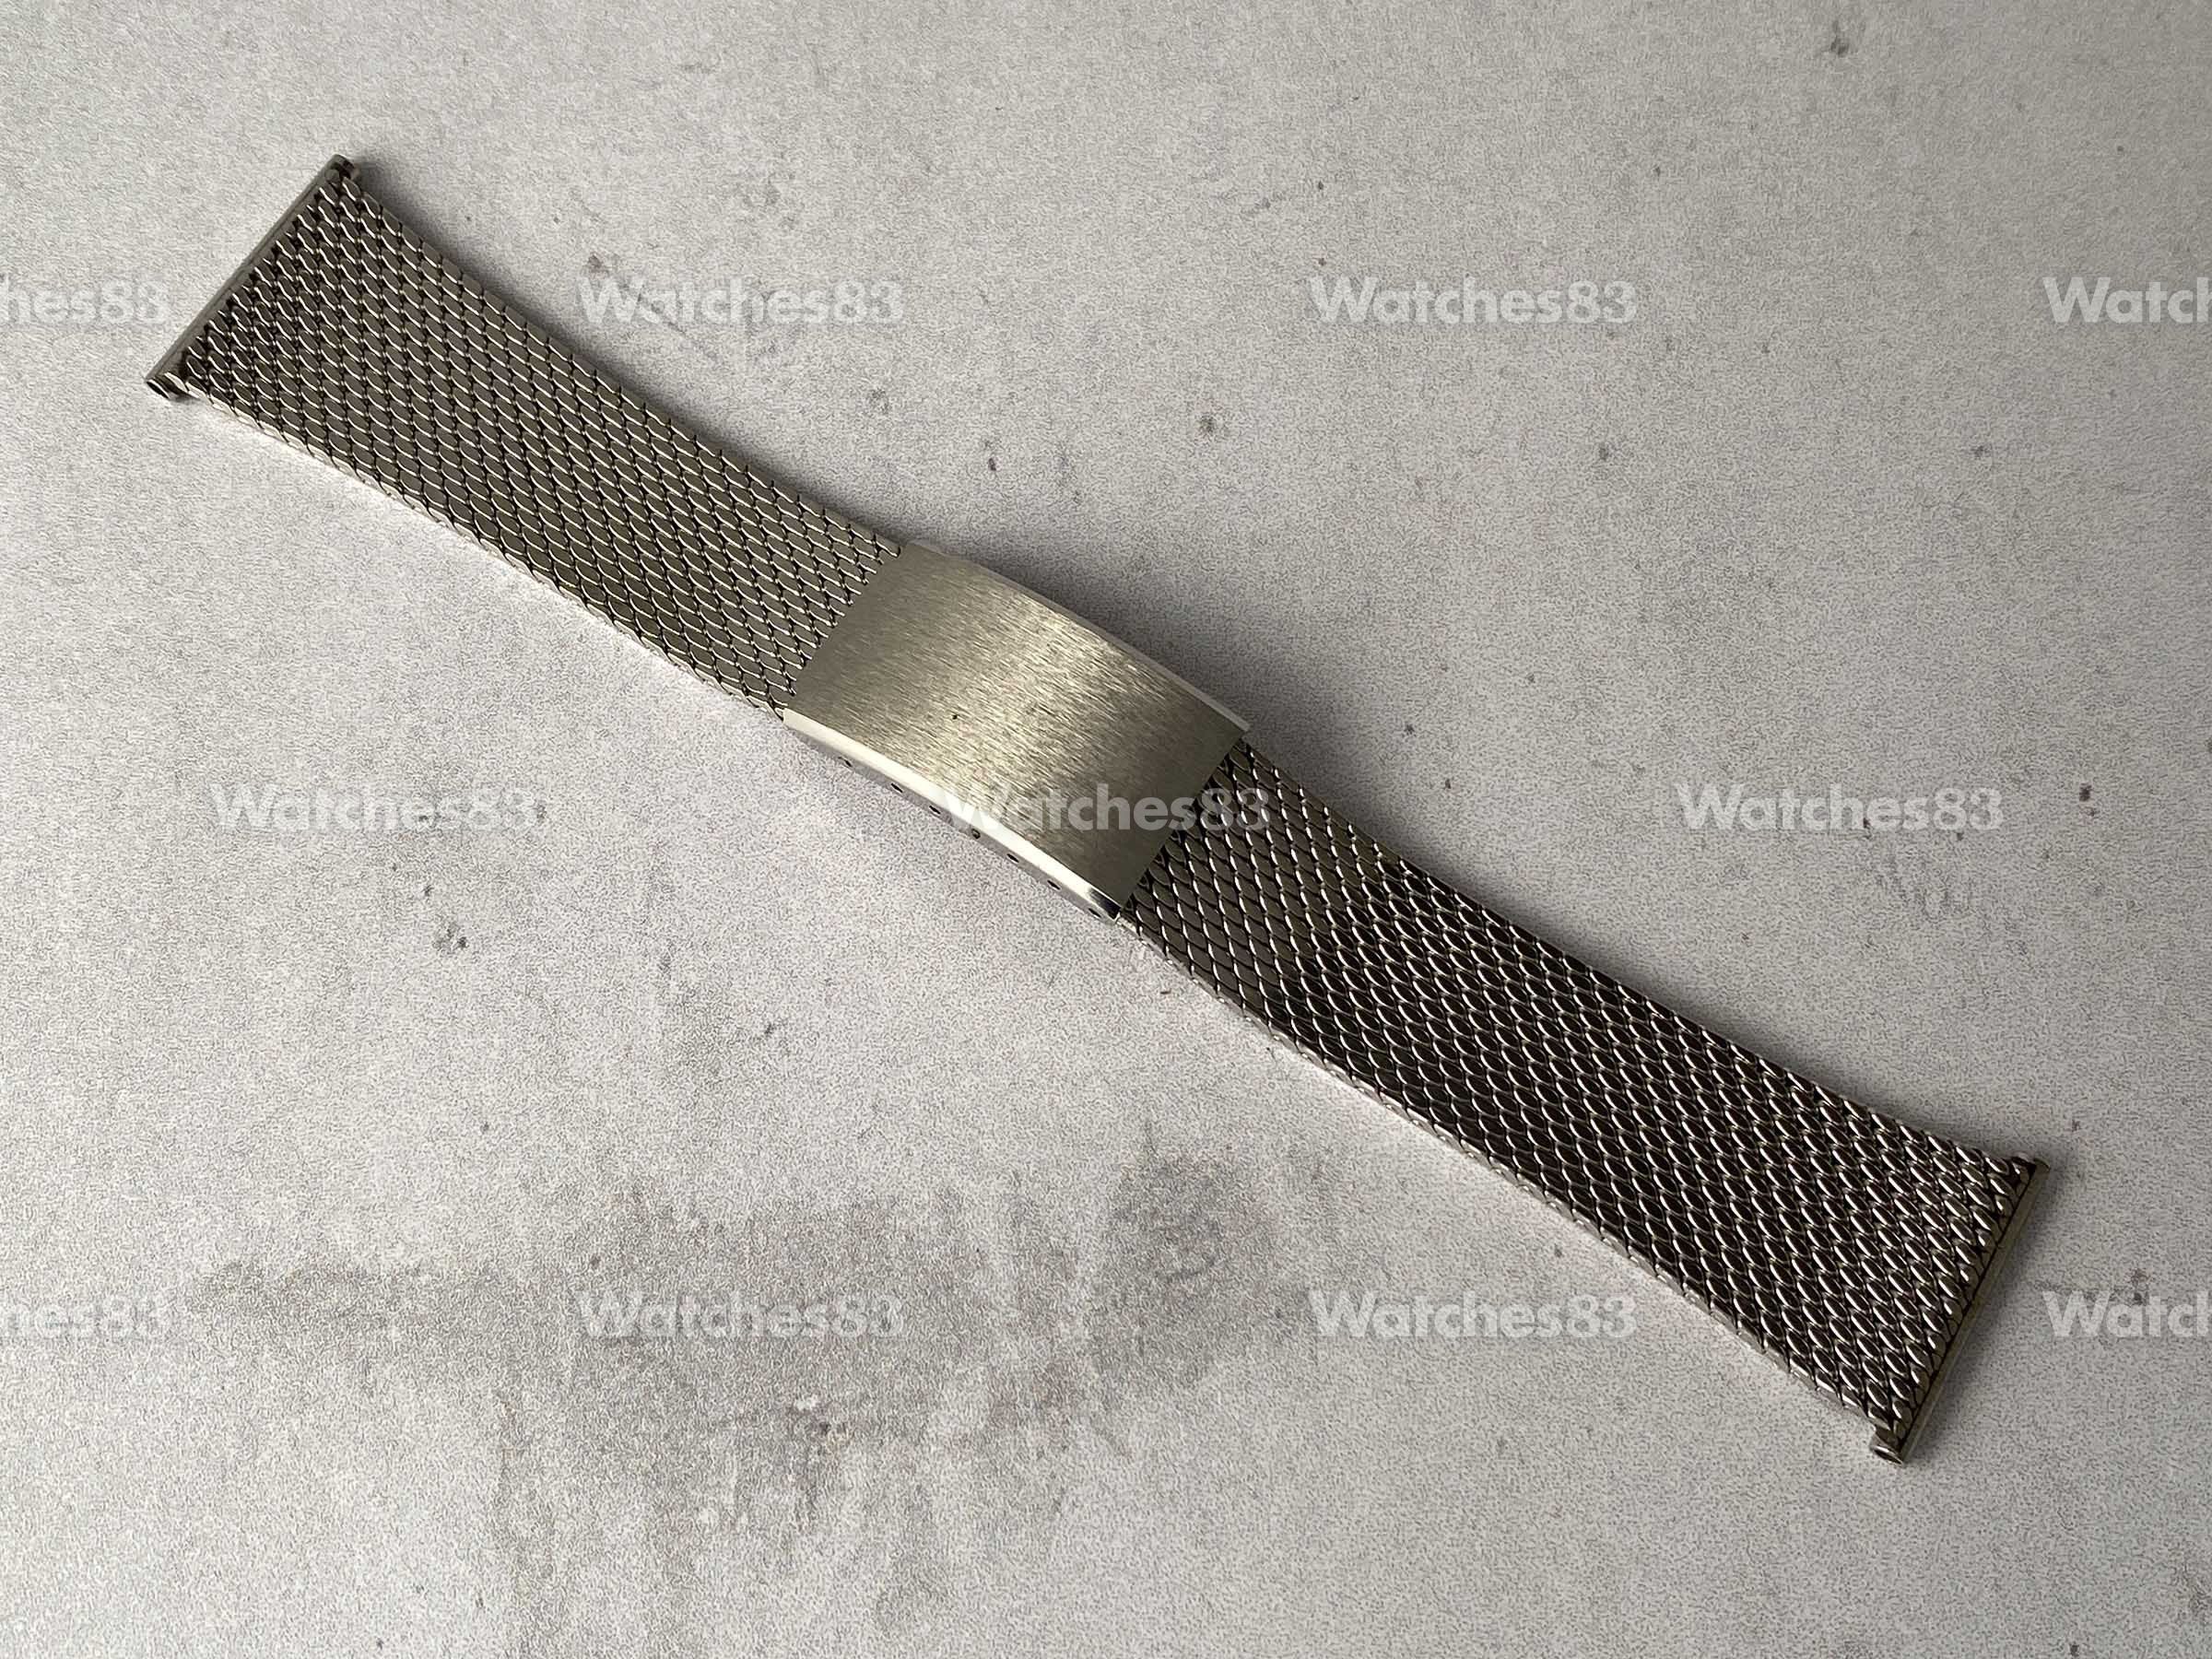 SMOOTH MILANESE MESH BRACELET Vintage Stainless Steel Watch Strap *** 24 mm  *** Watch Straps - Watches83